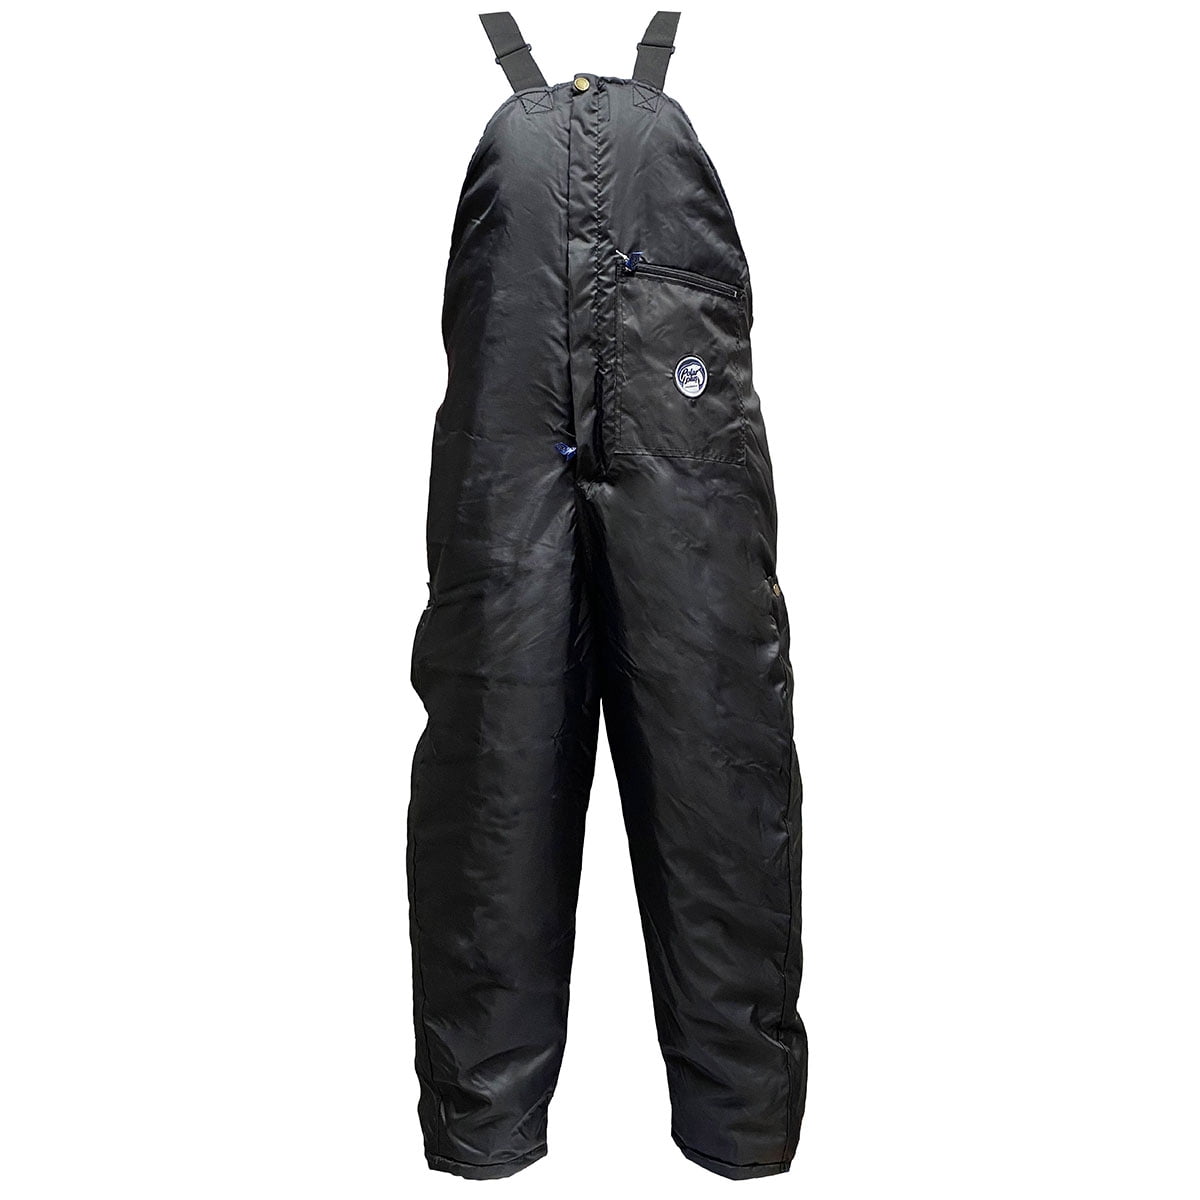 Polar Plus Men's Black Insulated Bib Overall for Work in Cold Weather ...